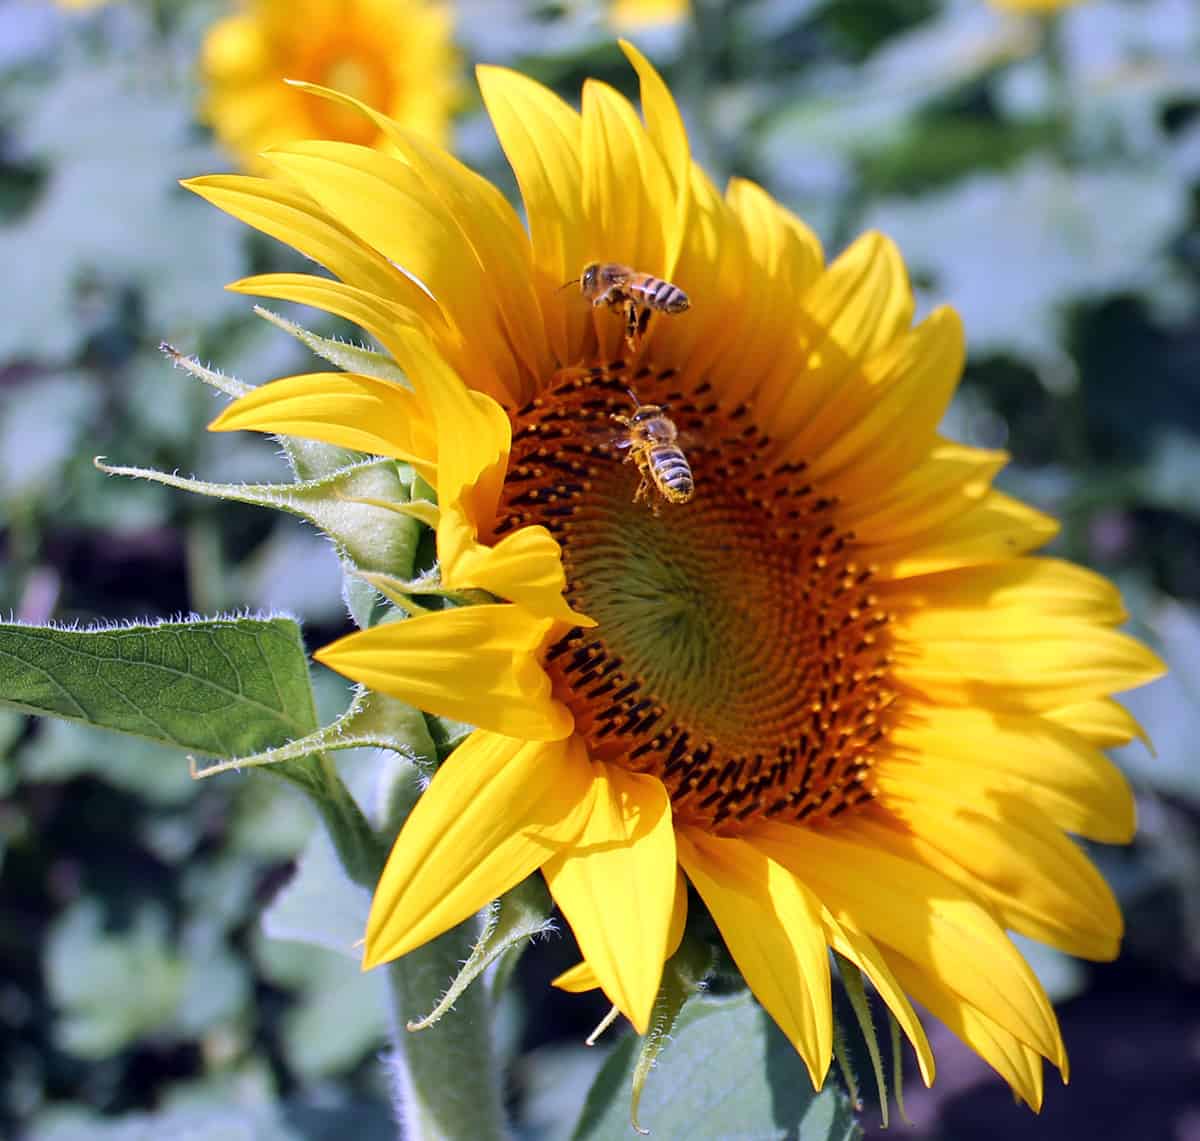 Two bees work to pollinate a sunflower in a sunflower field.